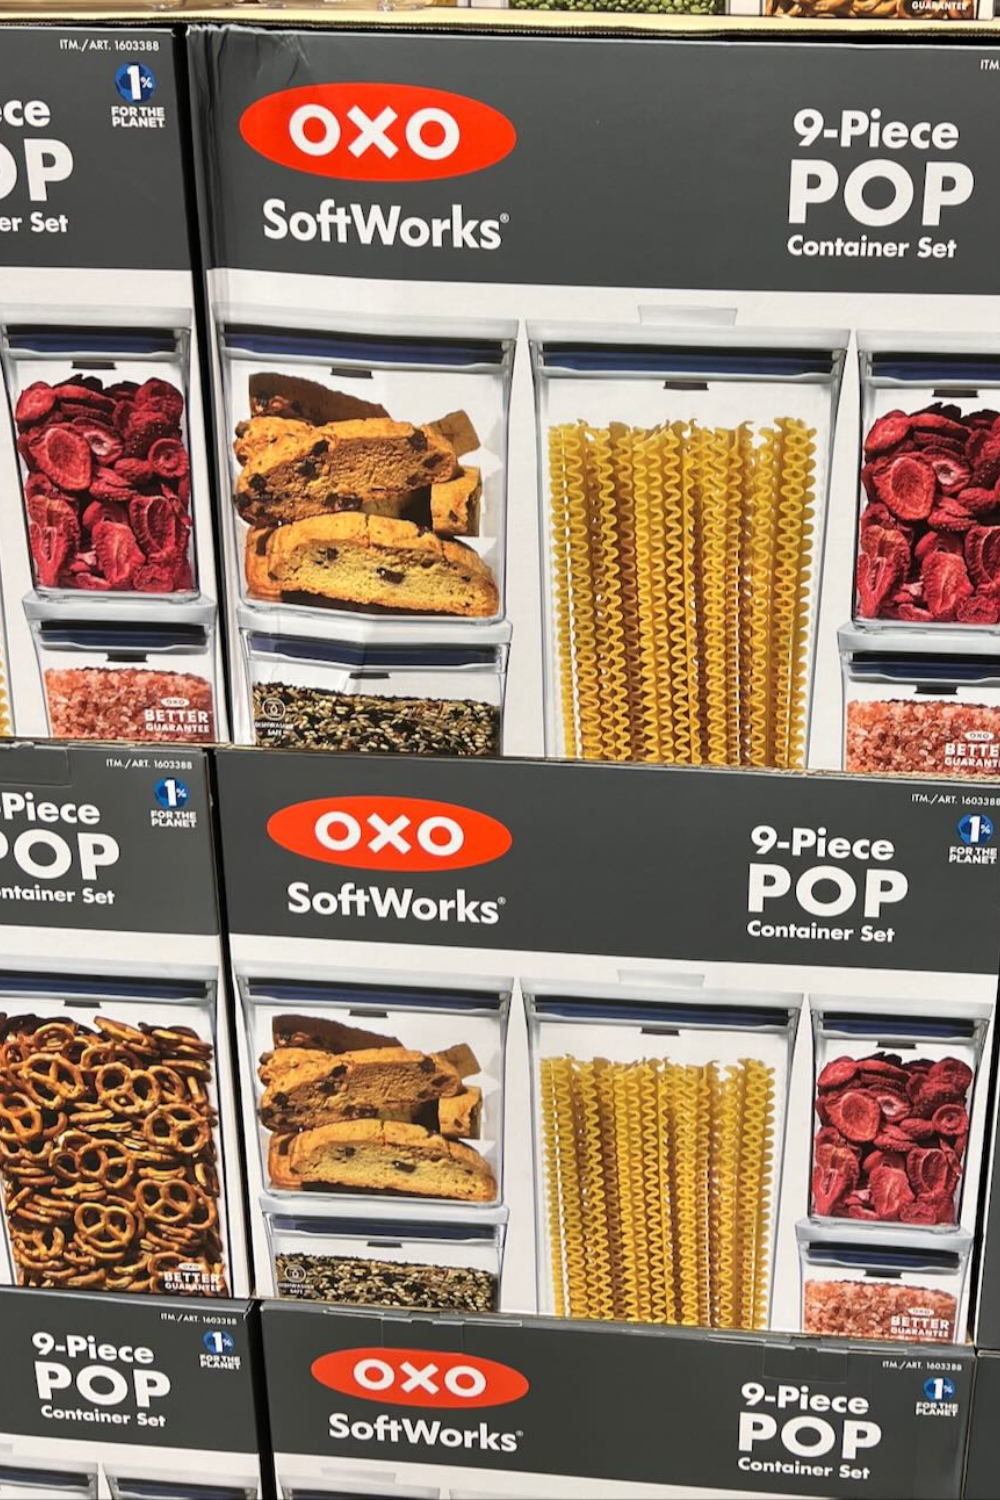 What to Expect at Costco June/July 2022